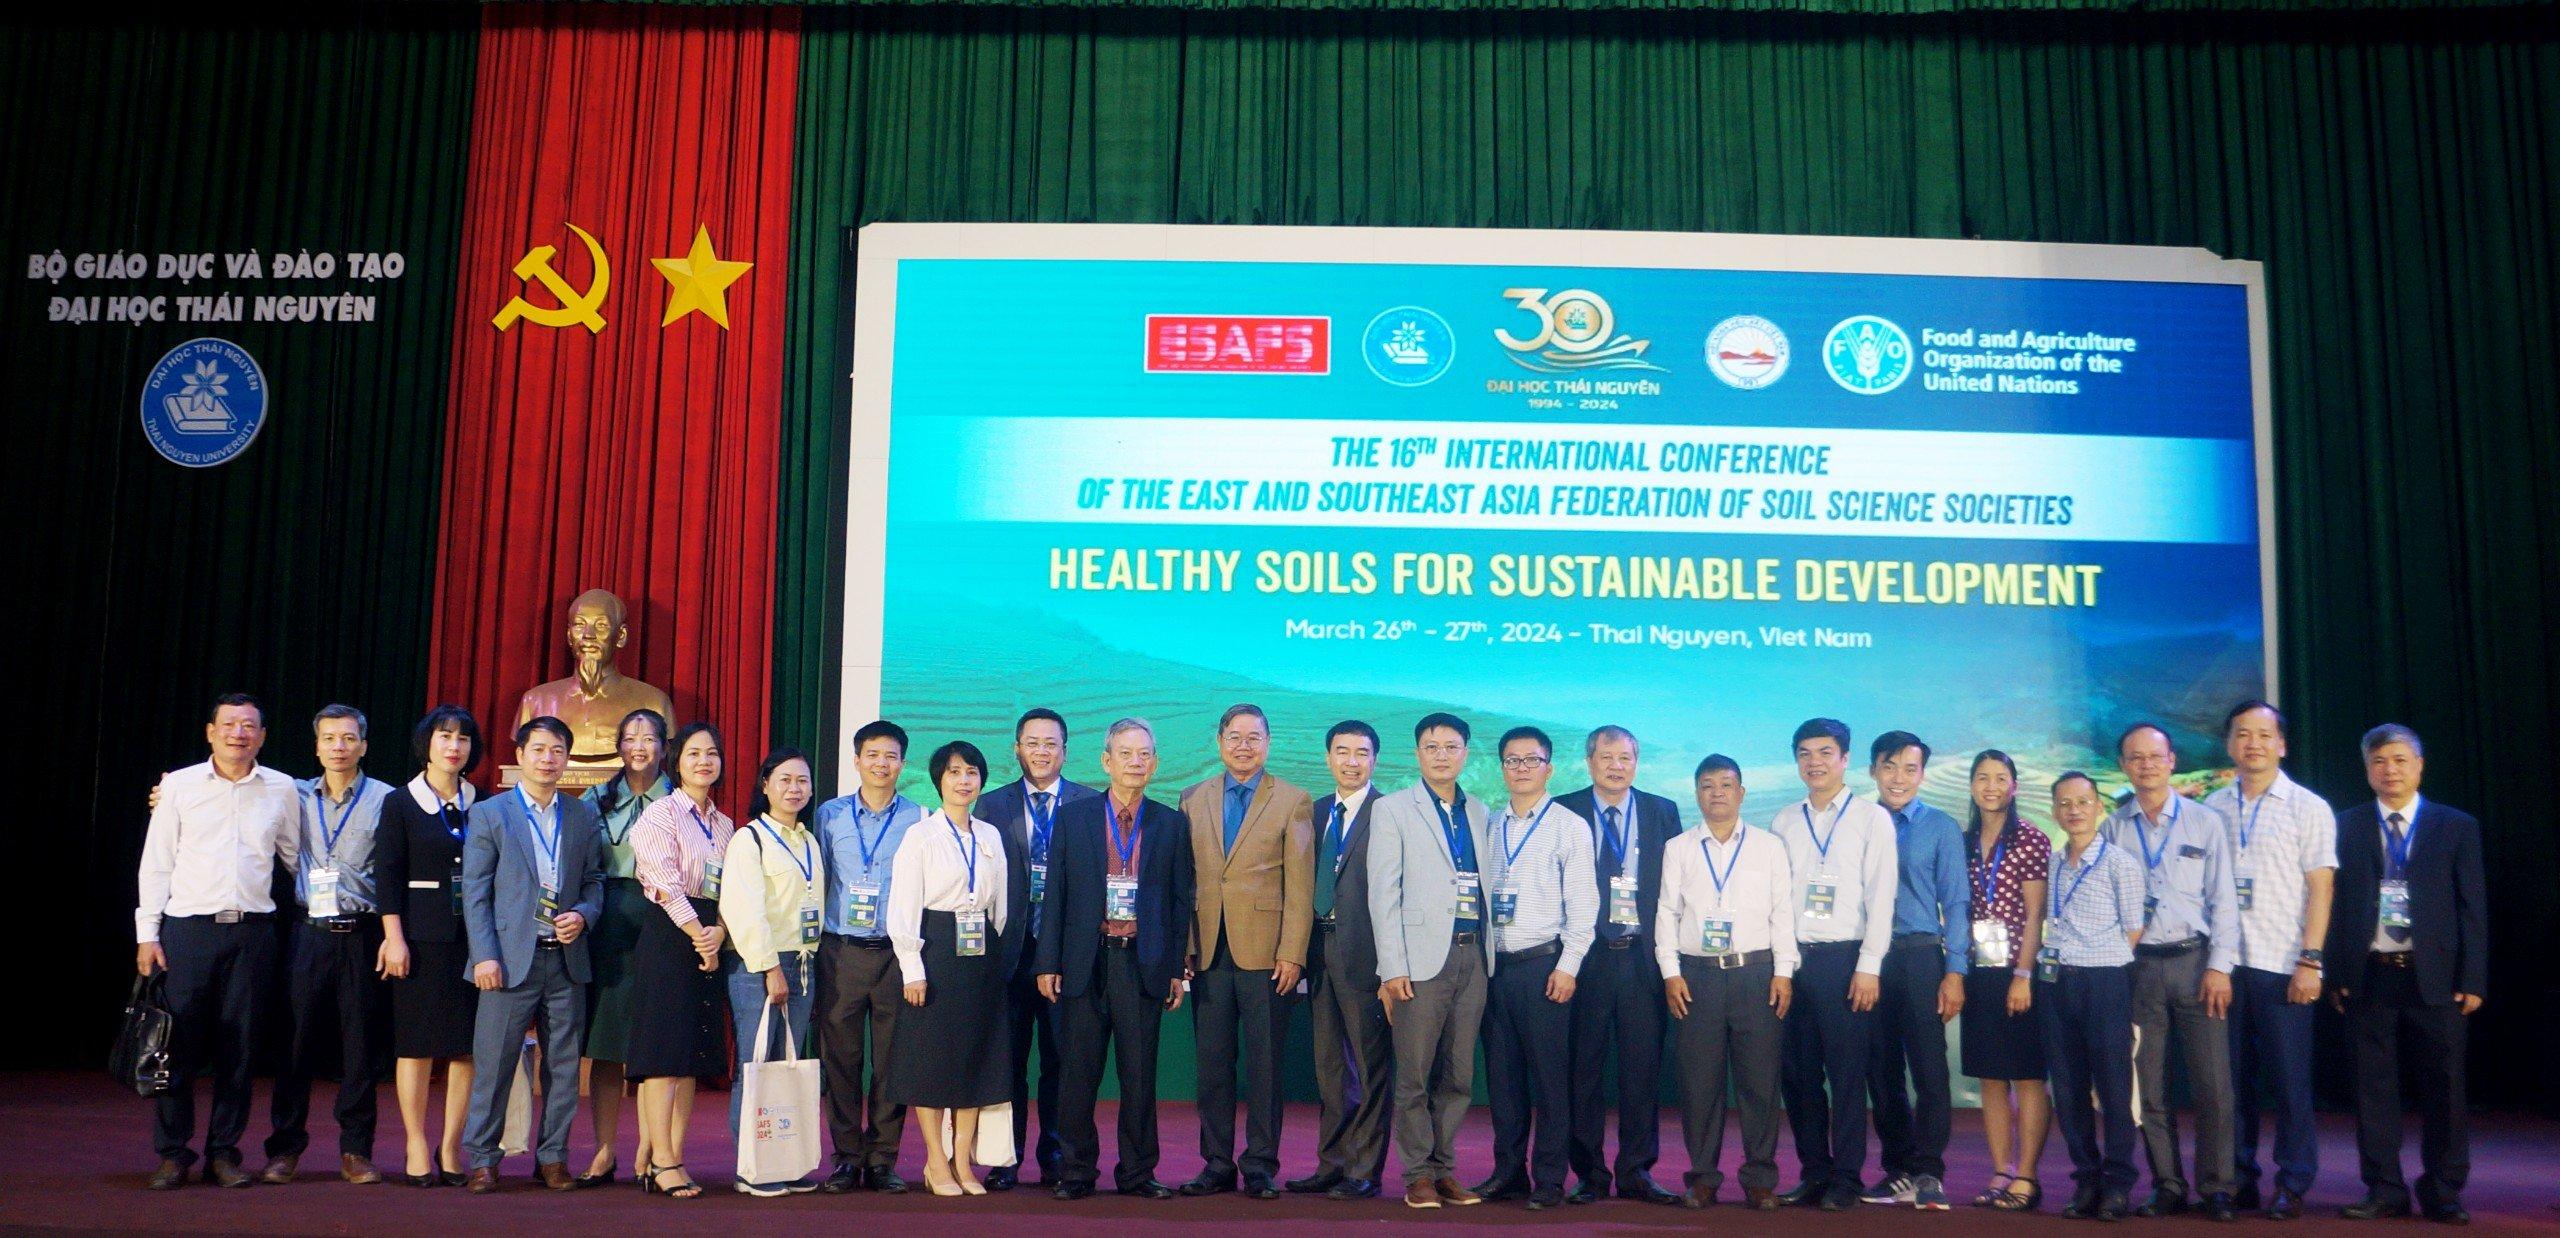 16TH EAST AND SOUTHEAST ASIA SOIL INTERNATIONAL CONFERENCE OF THE FEDERATION OF SOIL SCIENCE SOCIETIES (ESAFS 2024)